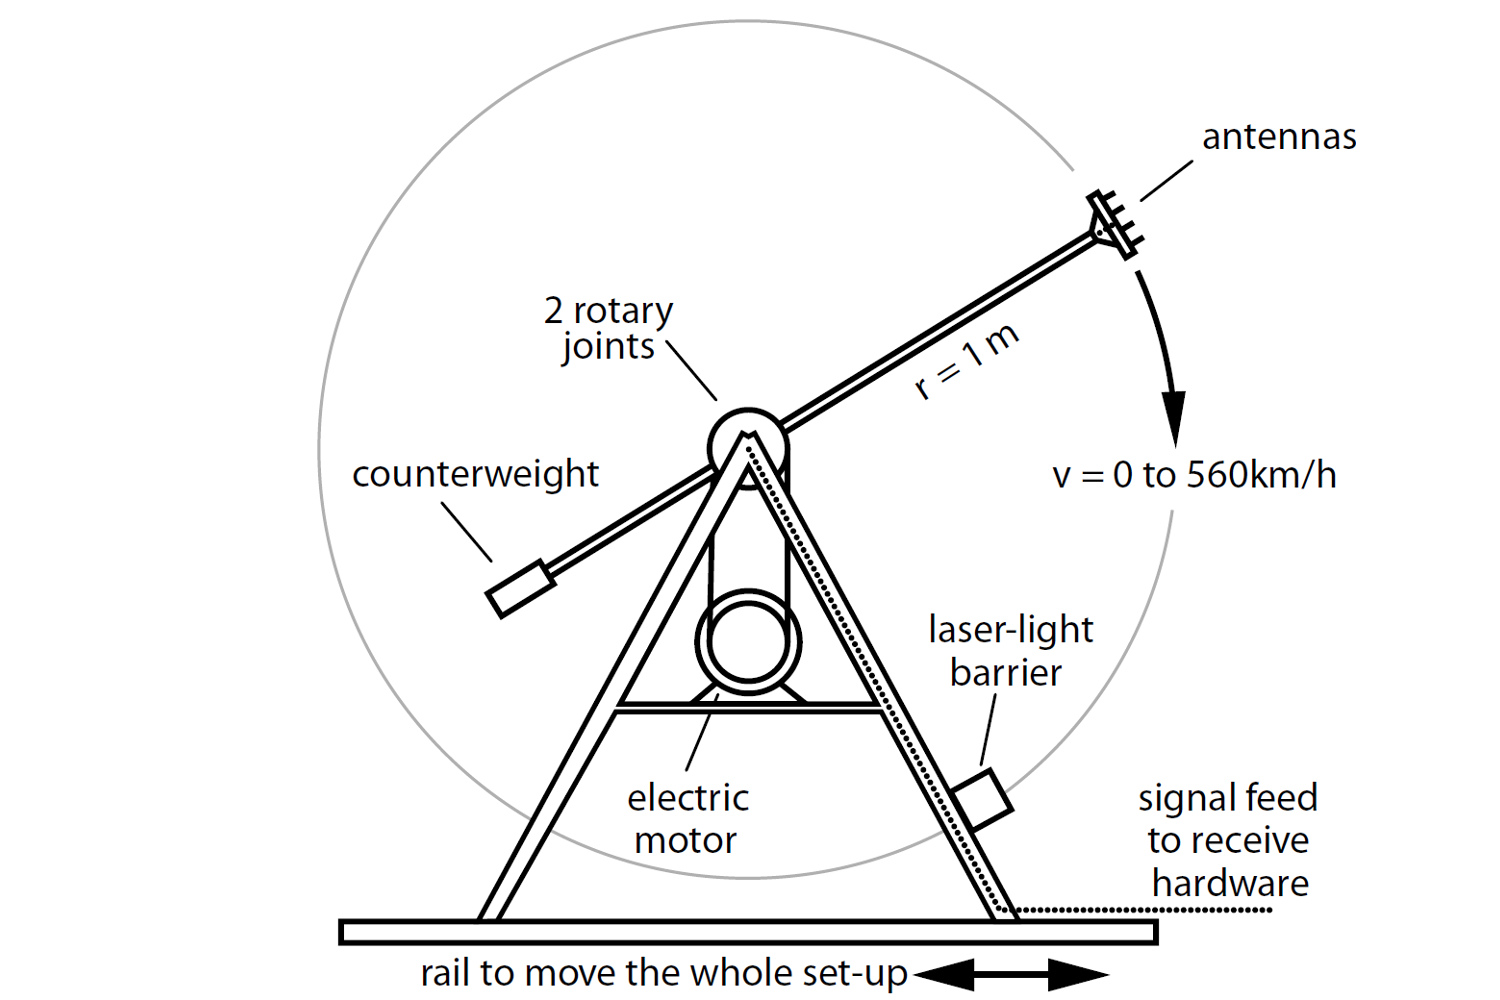 The sketch of Rotary unit shows the setup which allows for repeated transmissions over the same time-variant channel